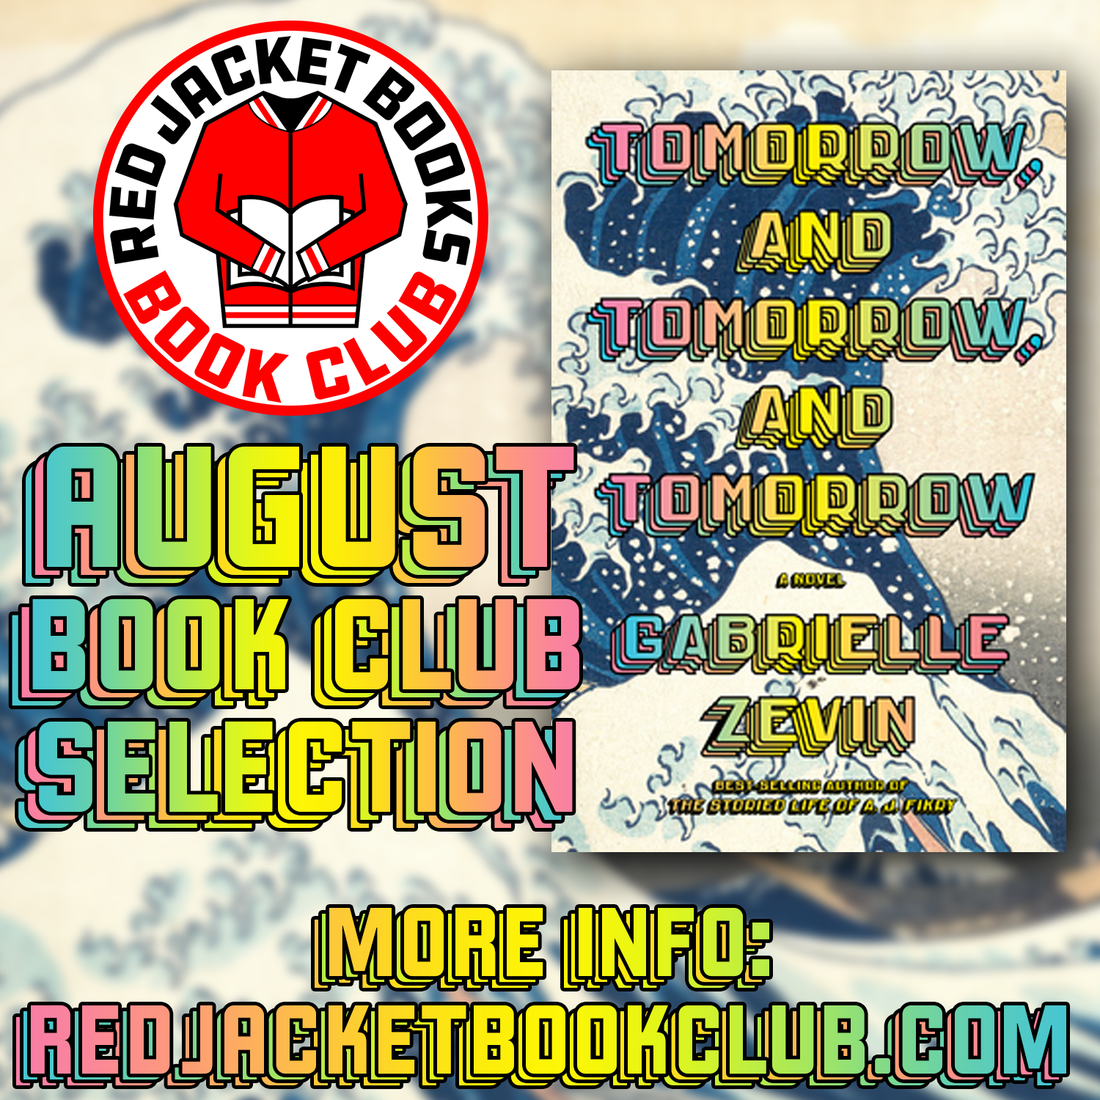 Red Jacket Book Club August 2022 Selection